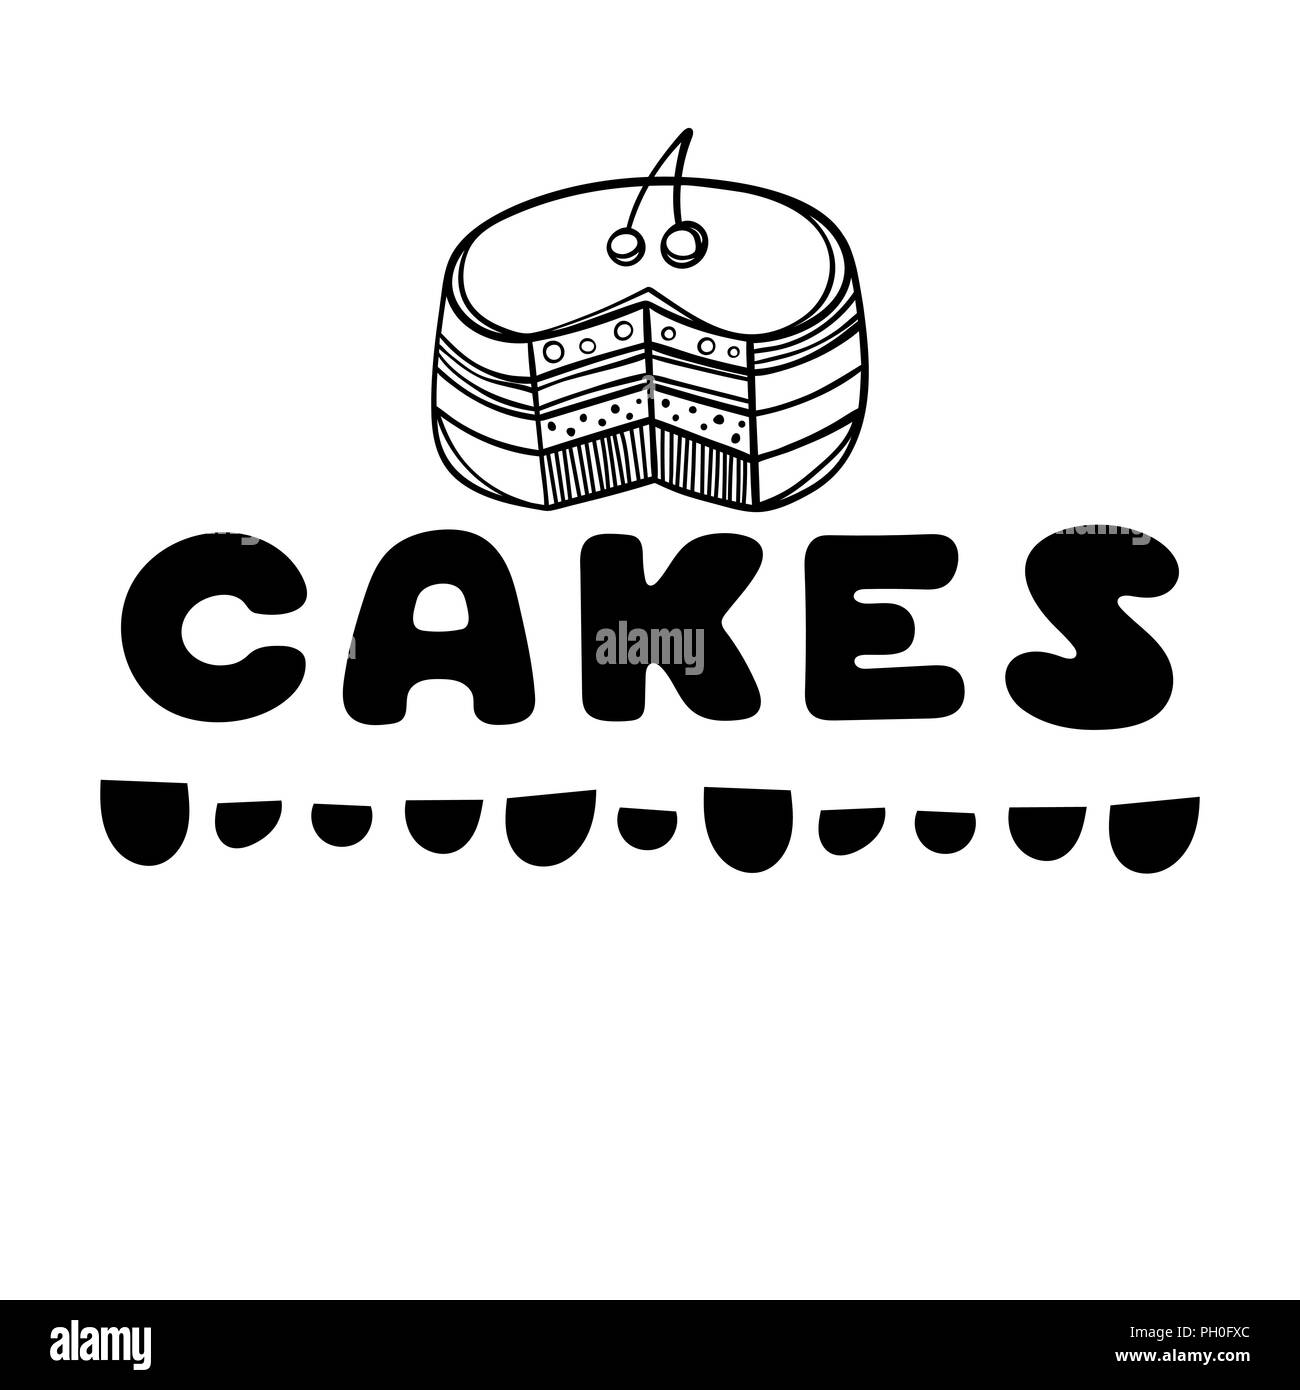 Cakes cover for cafe. Sketch concept illustration. Food flyer. Stock Vector